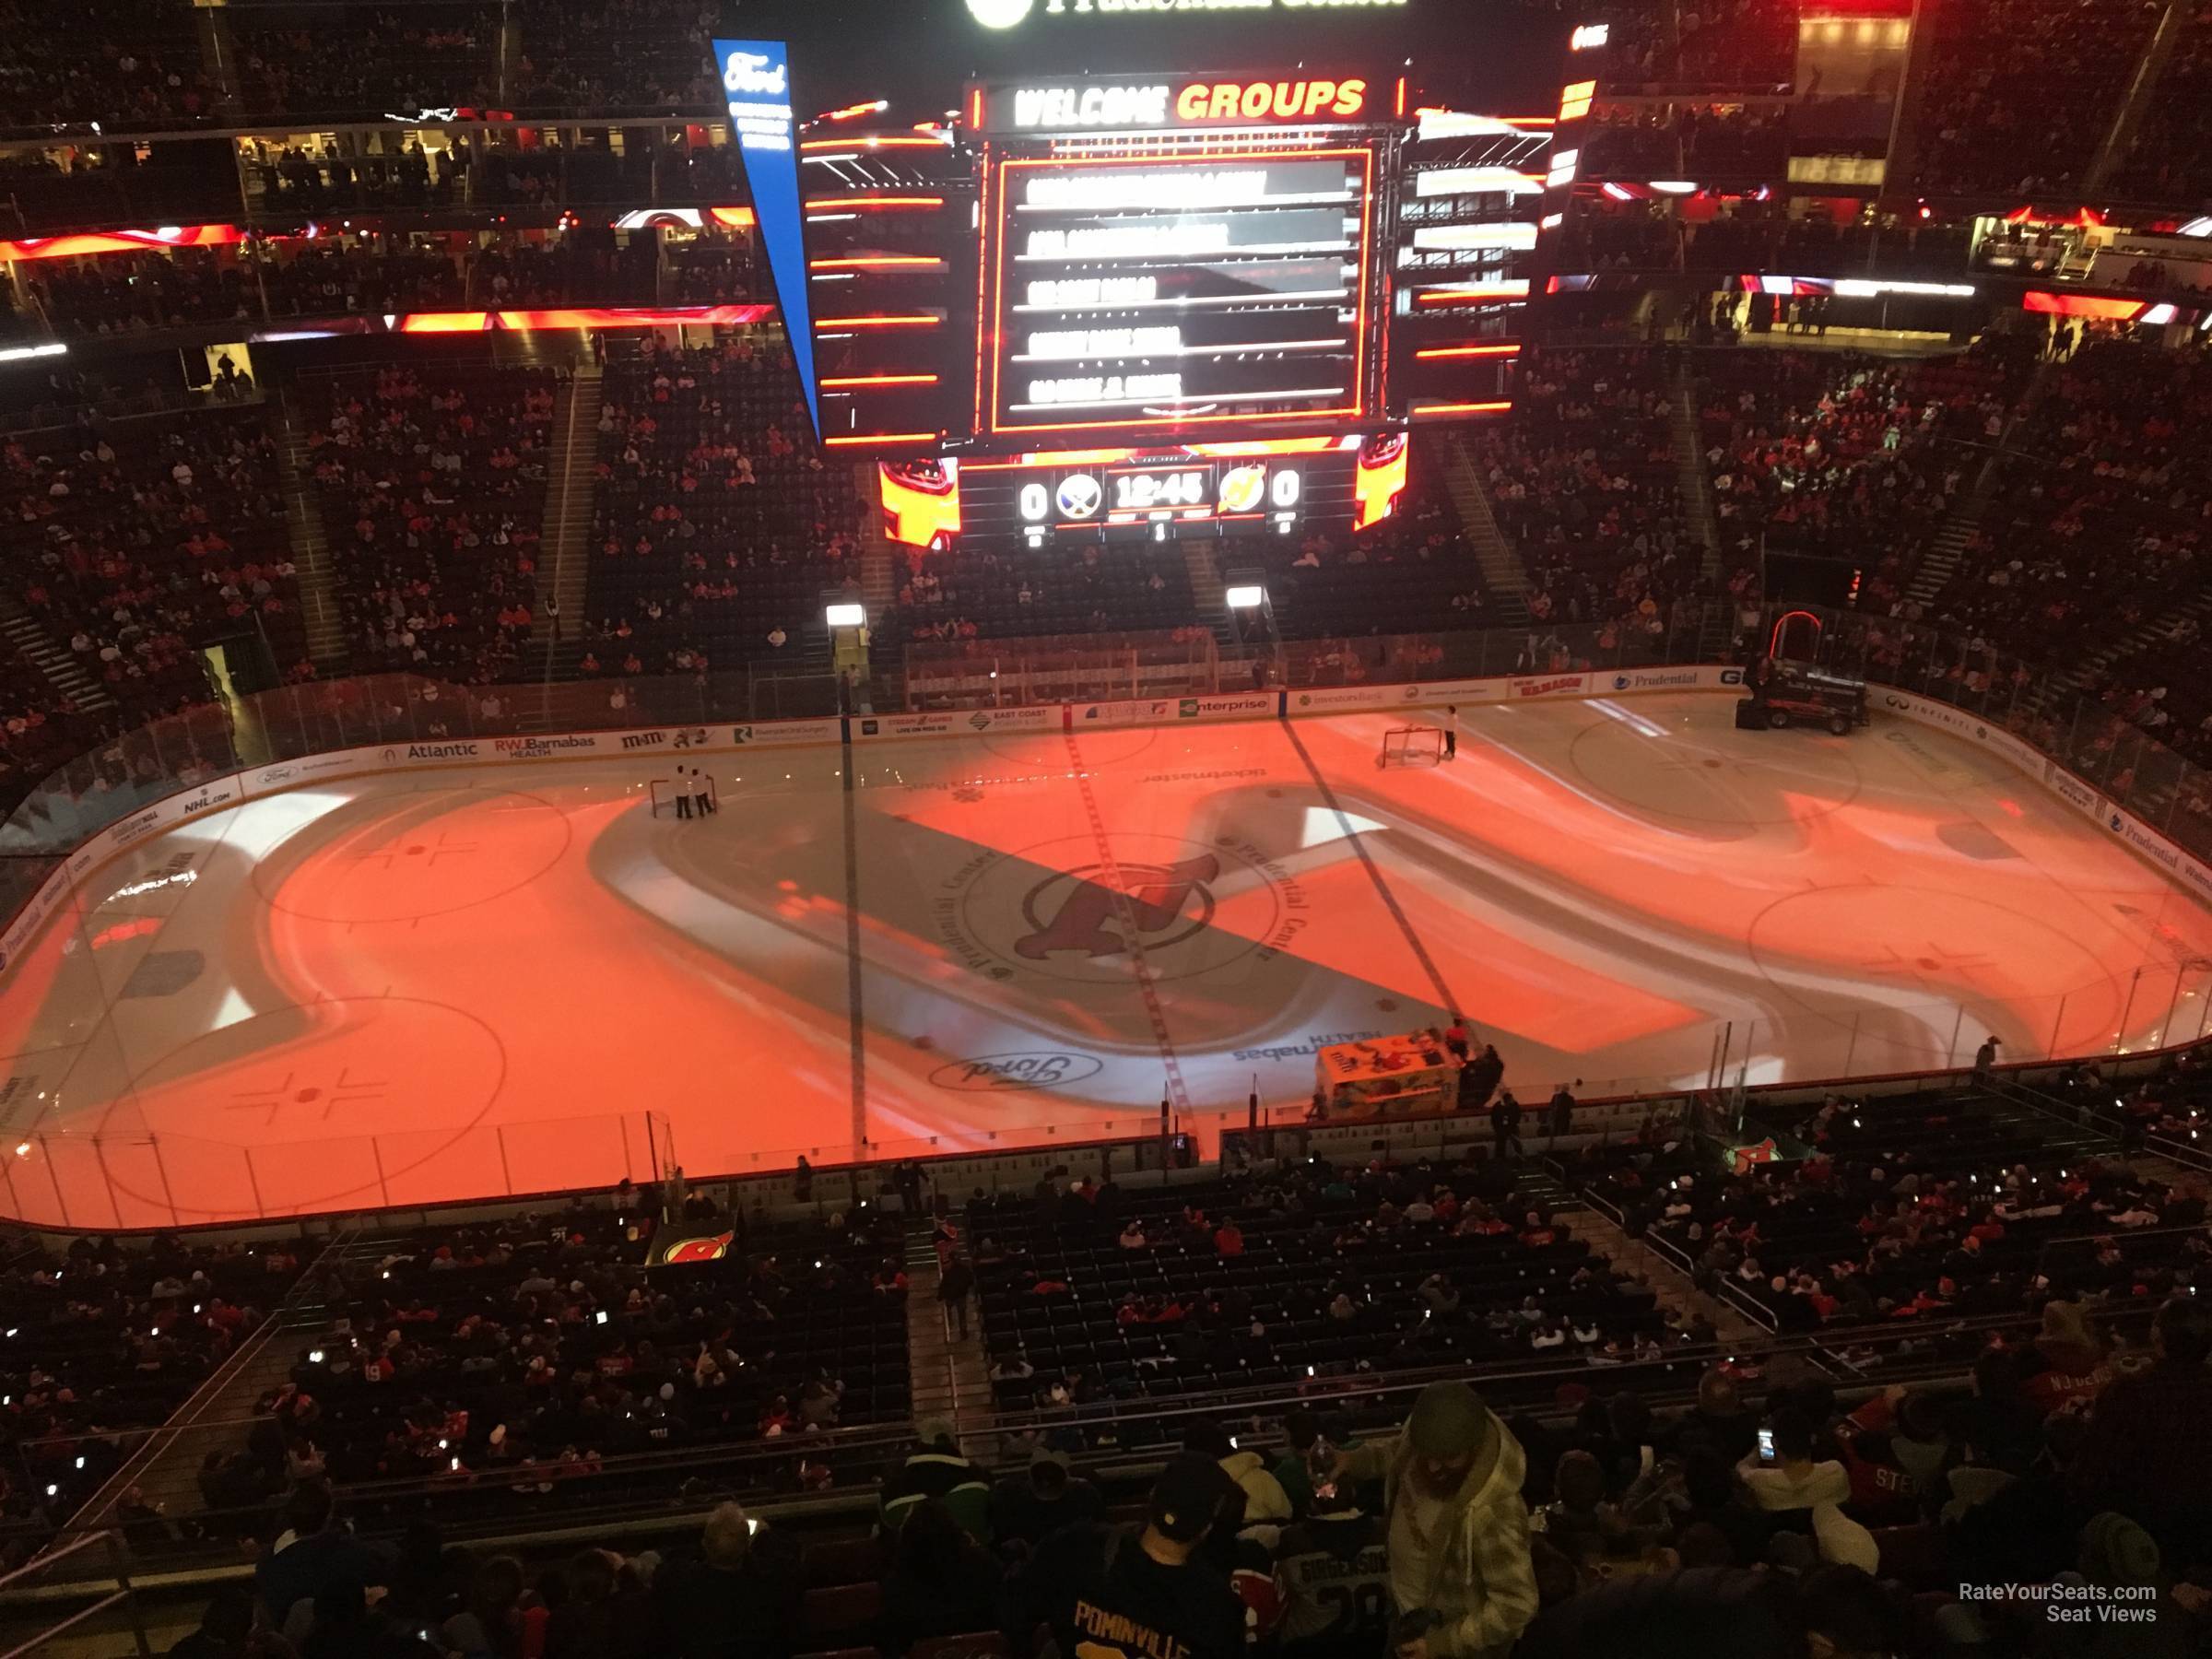 section 212, row 1 seat view  for hockey - prudential center